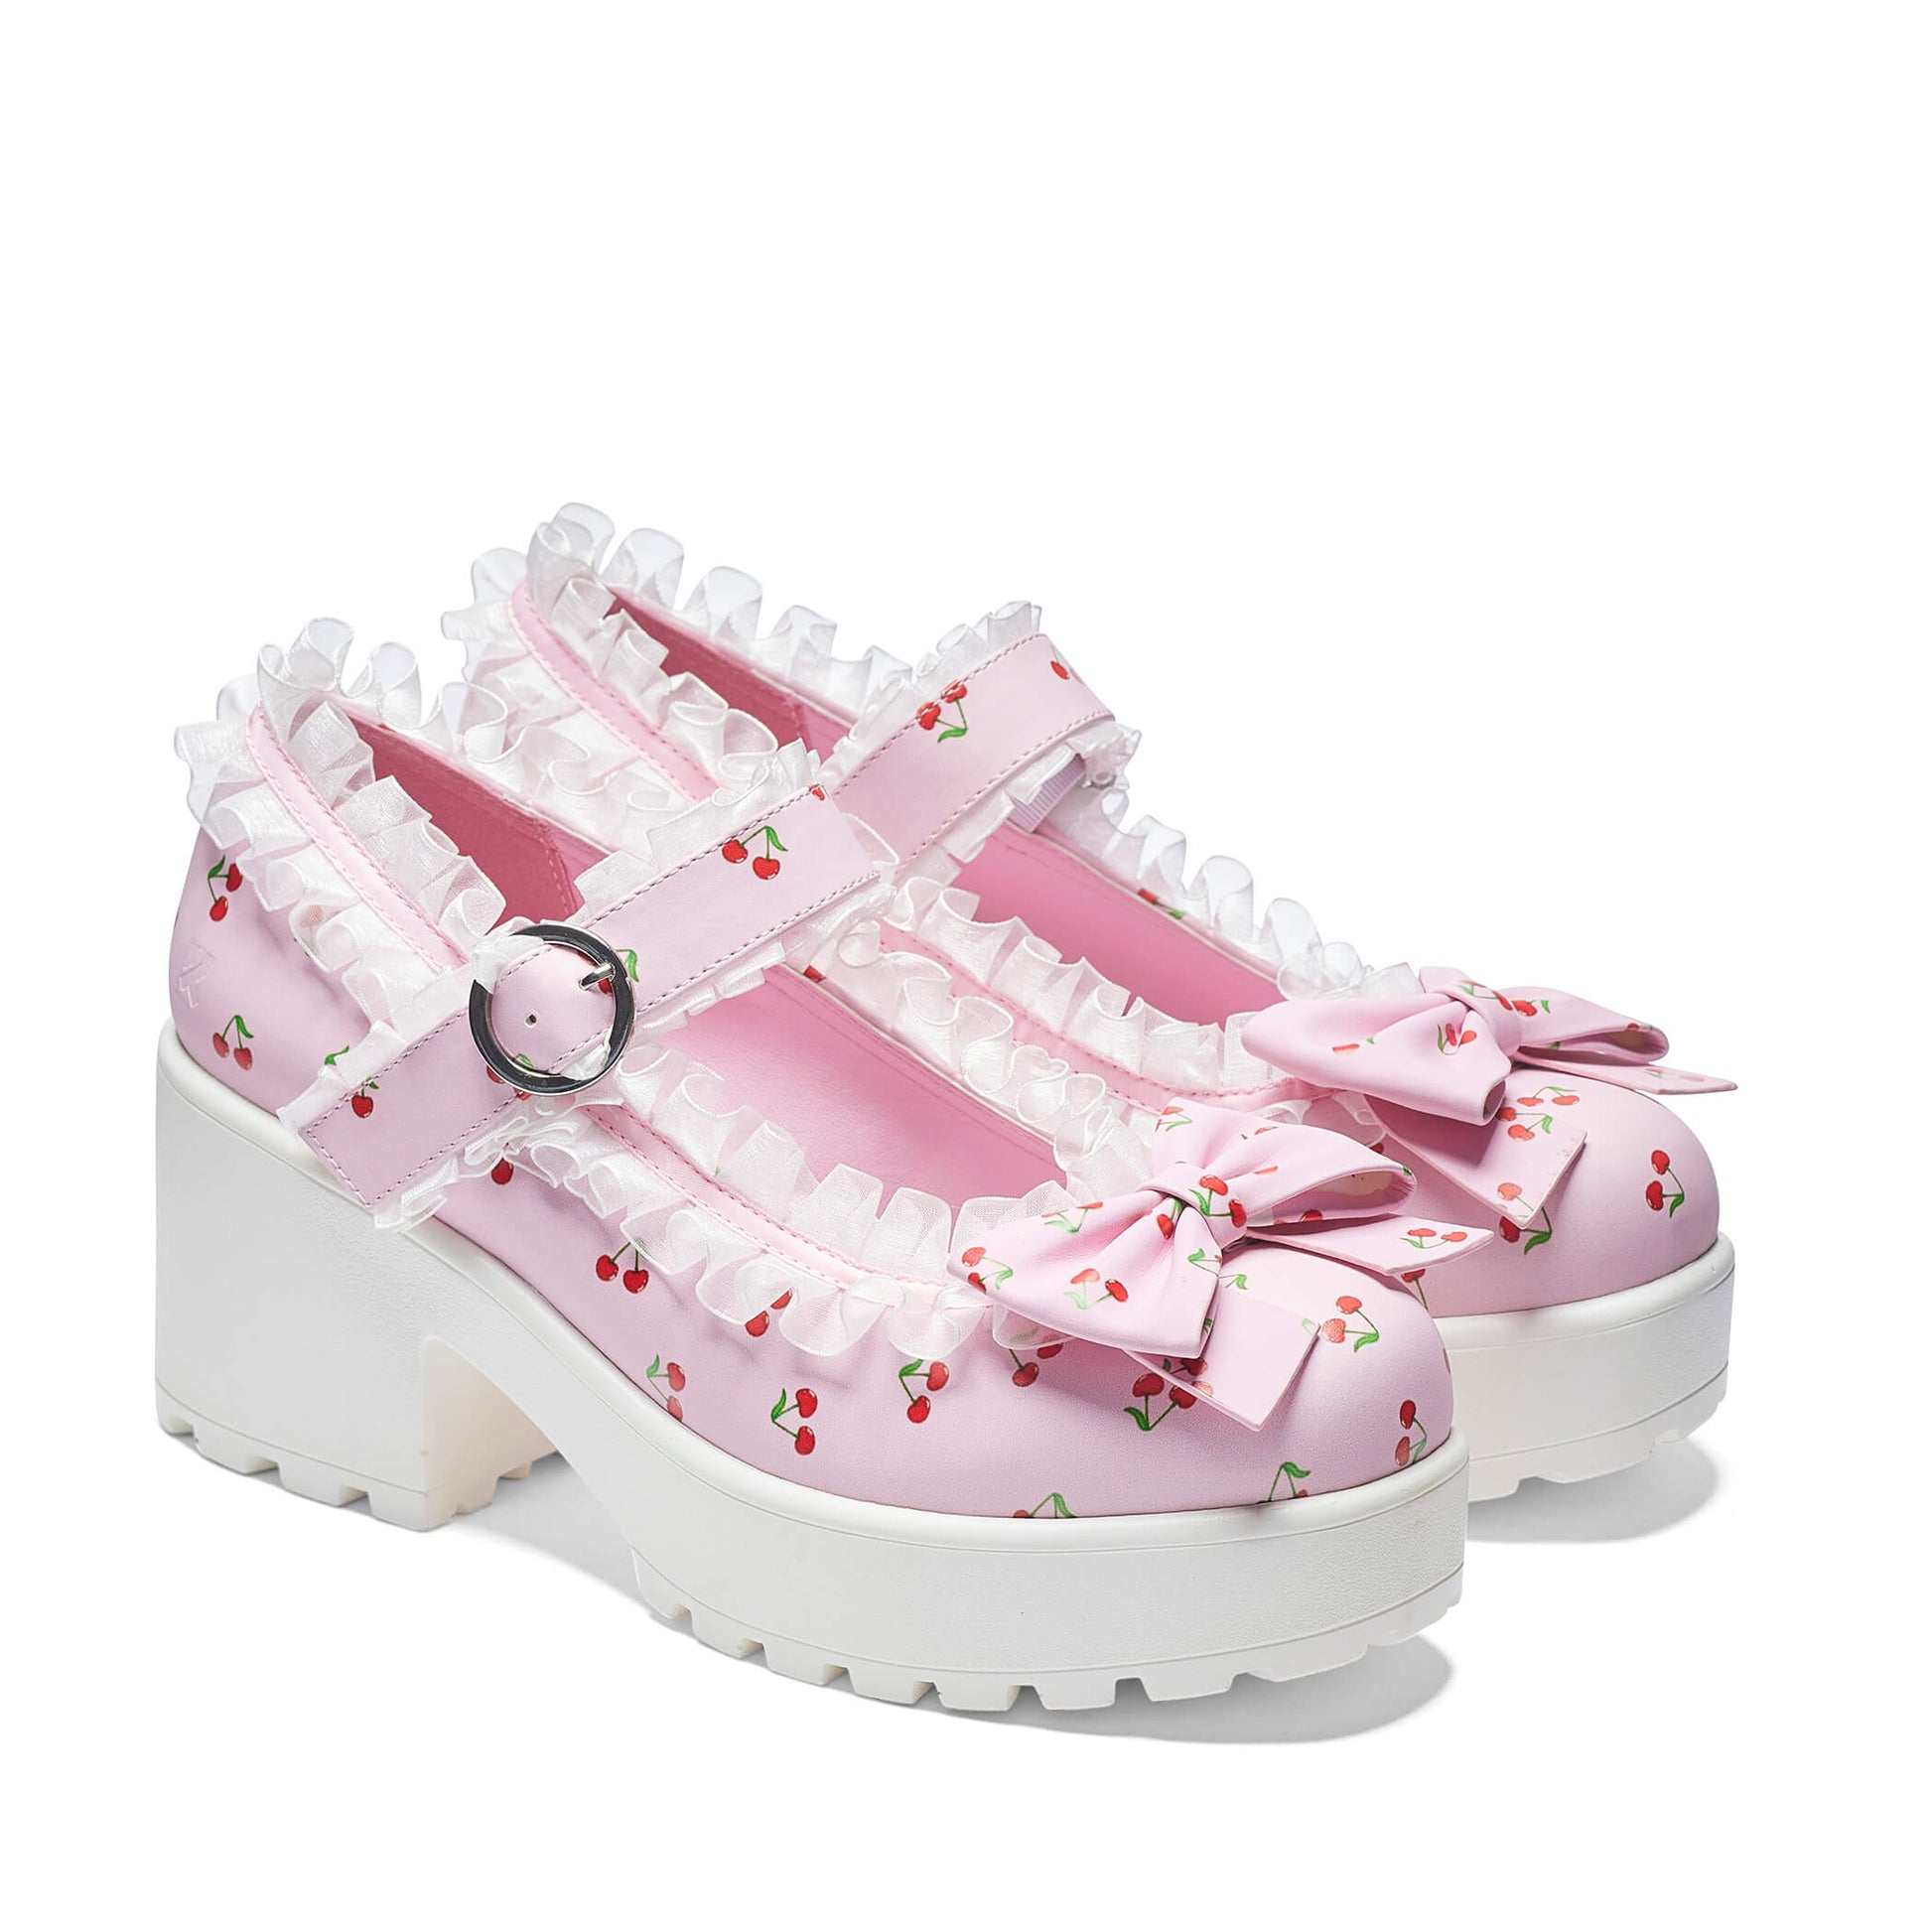 Tira Mary Janes Shoes 'Pink Cherry Bakewell Edition' - Mary Janes - KOI Footwear - Pink - Three-Quarter View